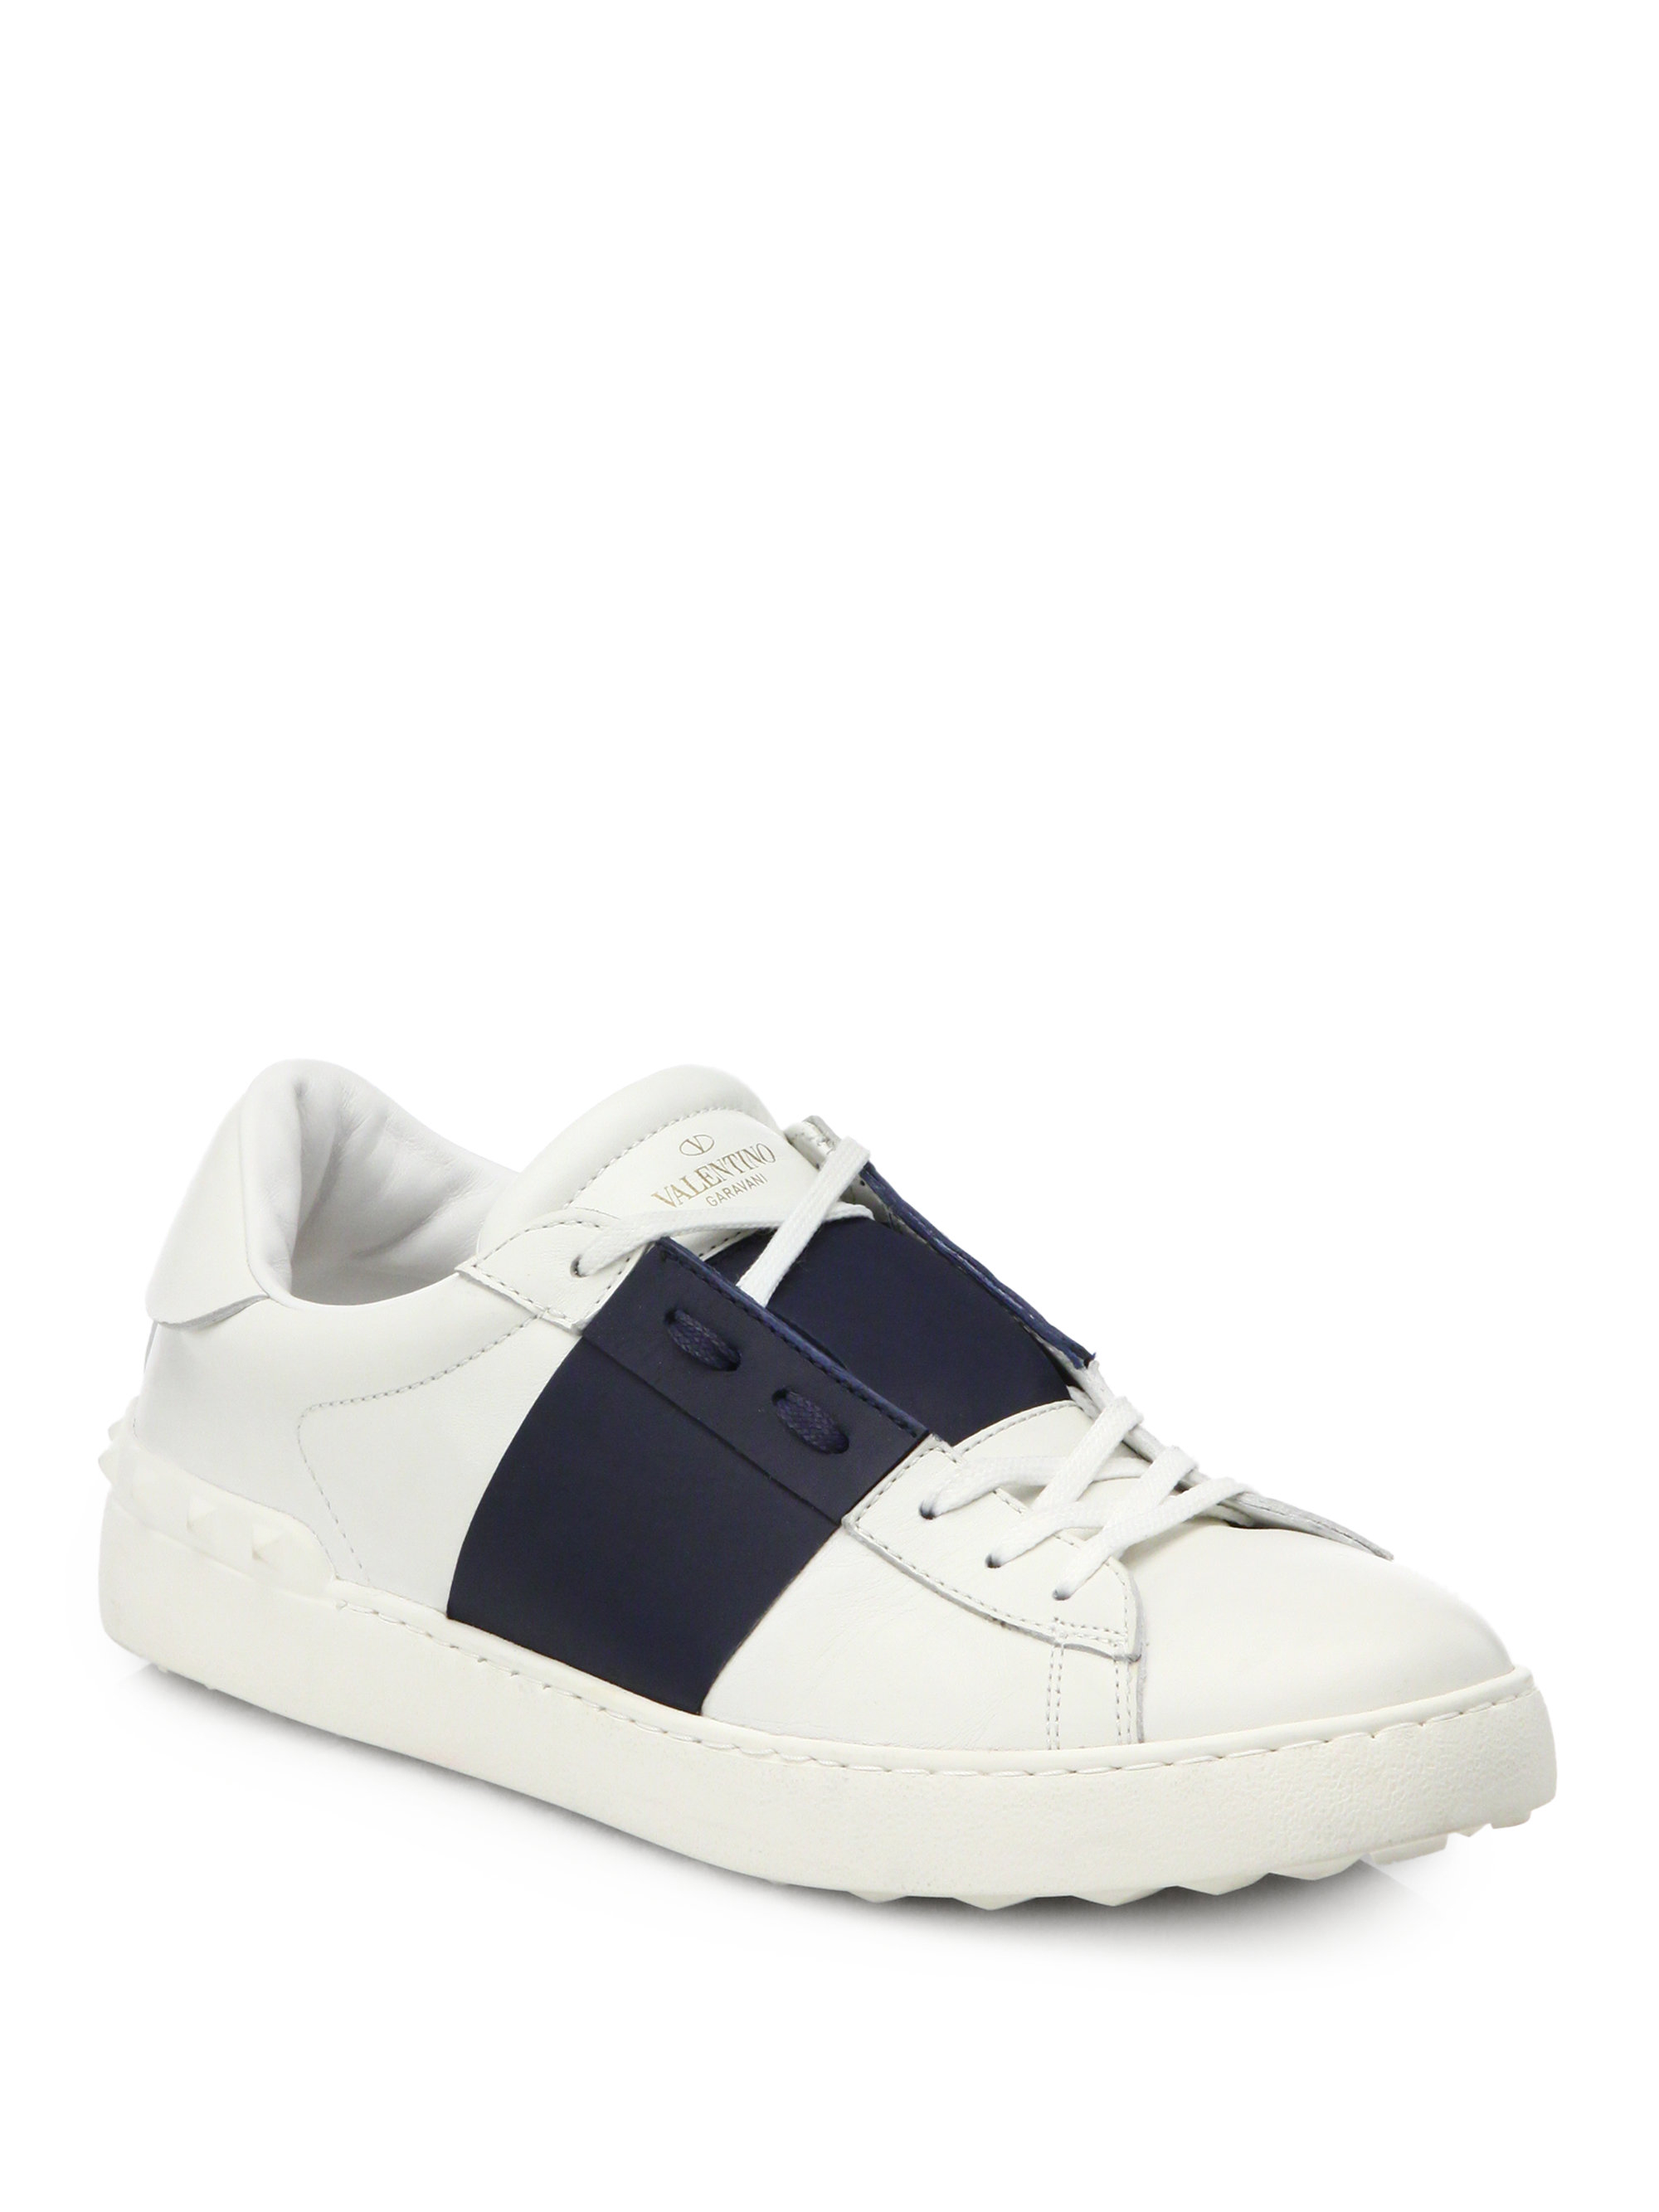 Valentino Studded Leather Sneakers in White for Men (NAVY-WHITE) | Lyst